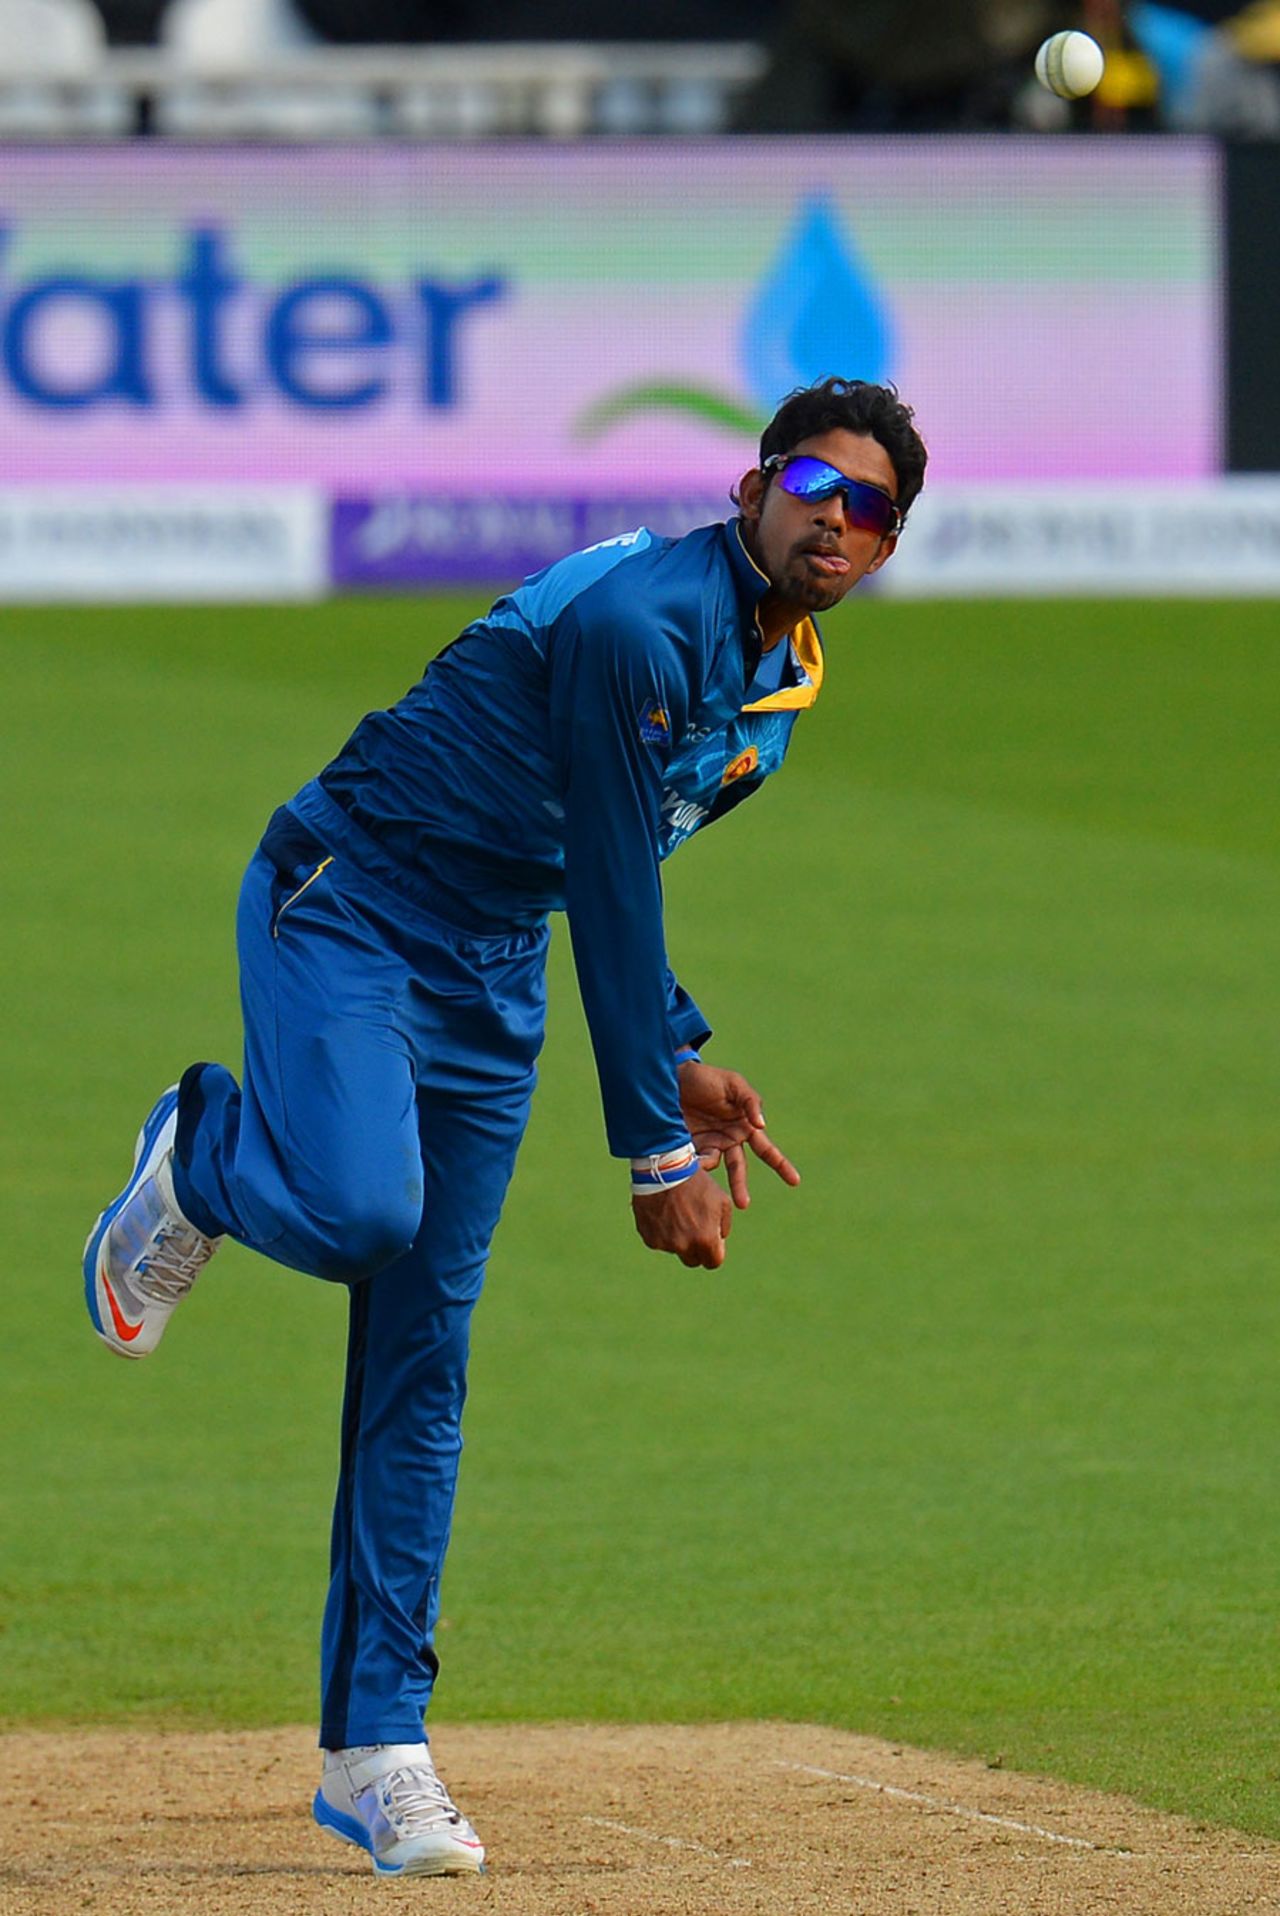 Sachithra Senanayake took 3 for 30 in eight excellent overs, England v Sri Lanka, 1st ODI, The Oval, May 22, 2014